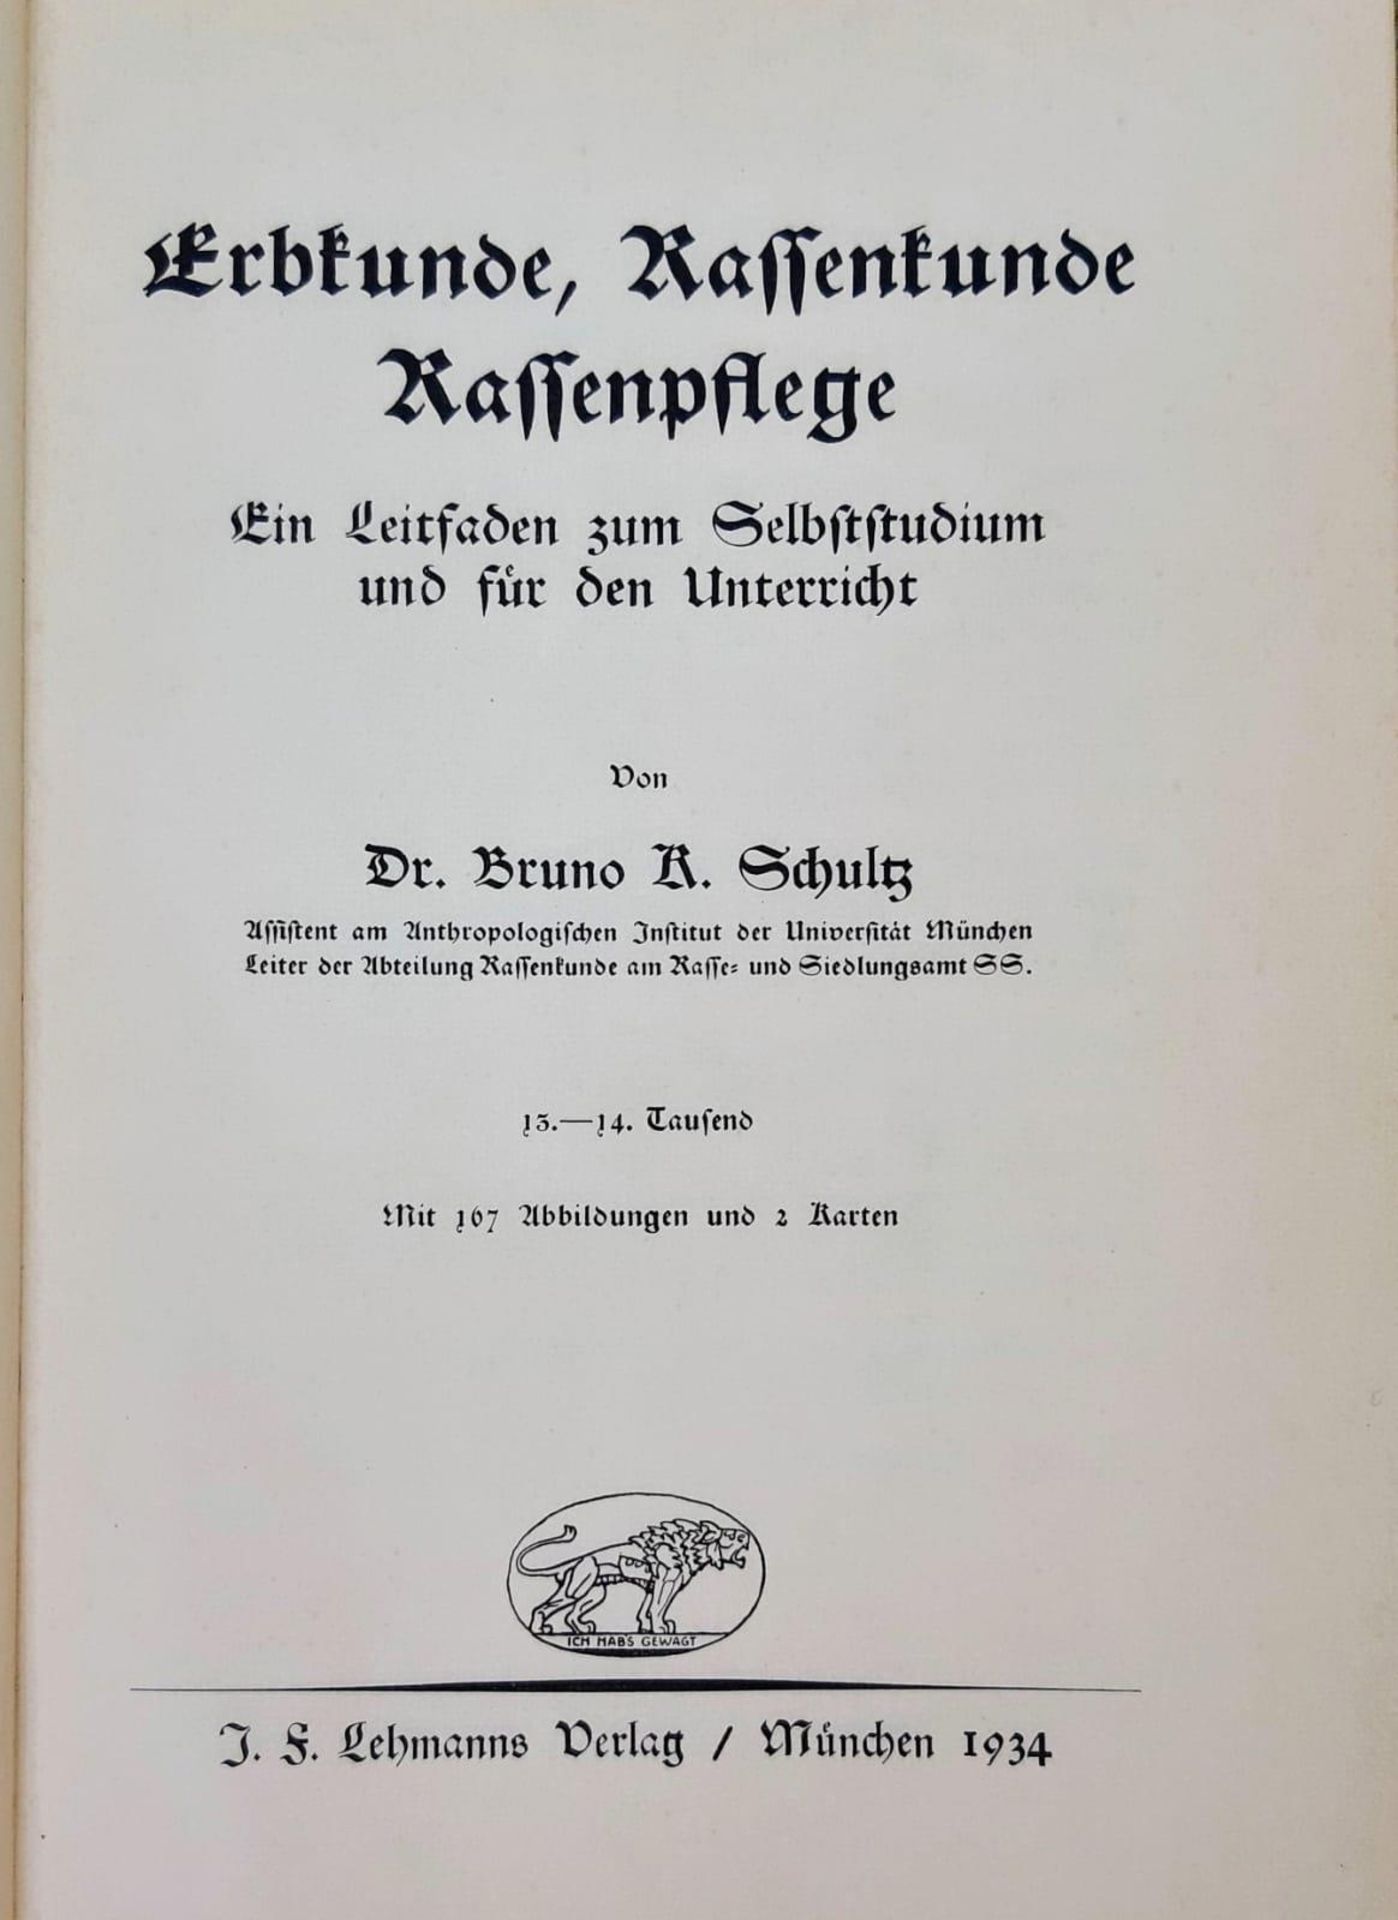 1934 Edition of the German Book Heredity, Racial Science, Racial Care. A Guide for self-study and - Bild 2 aus 5